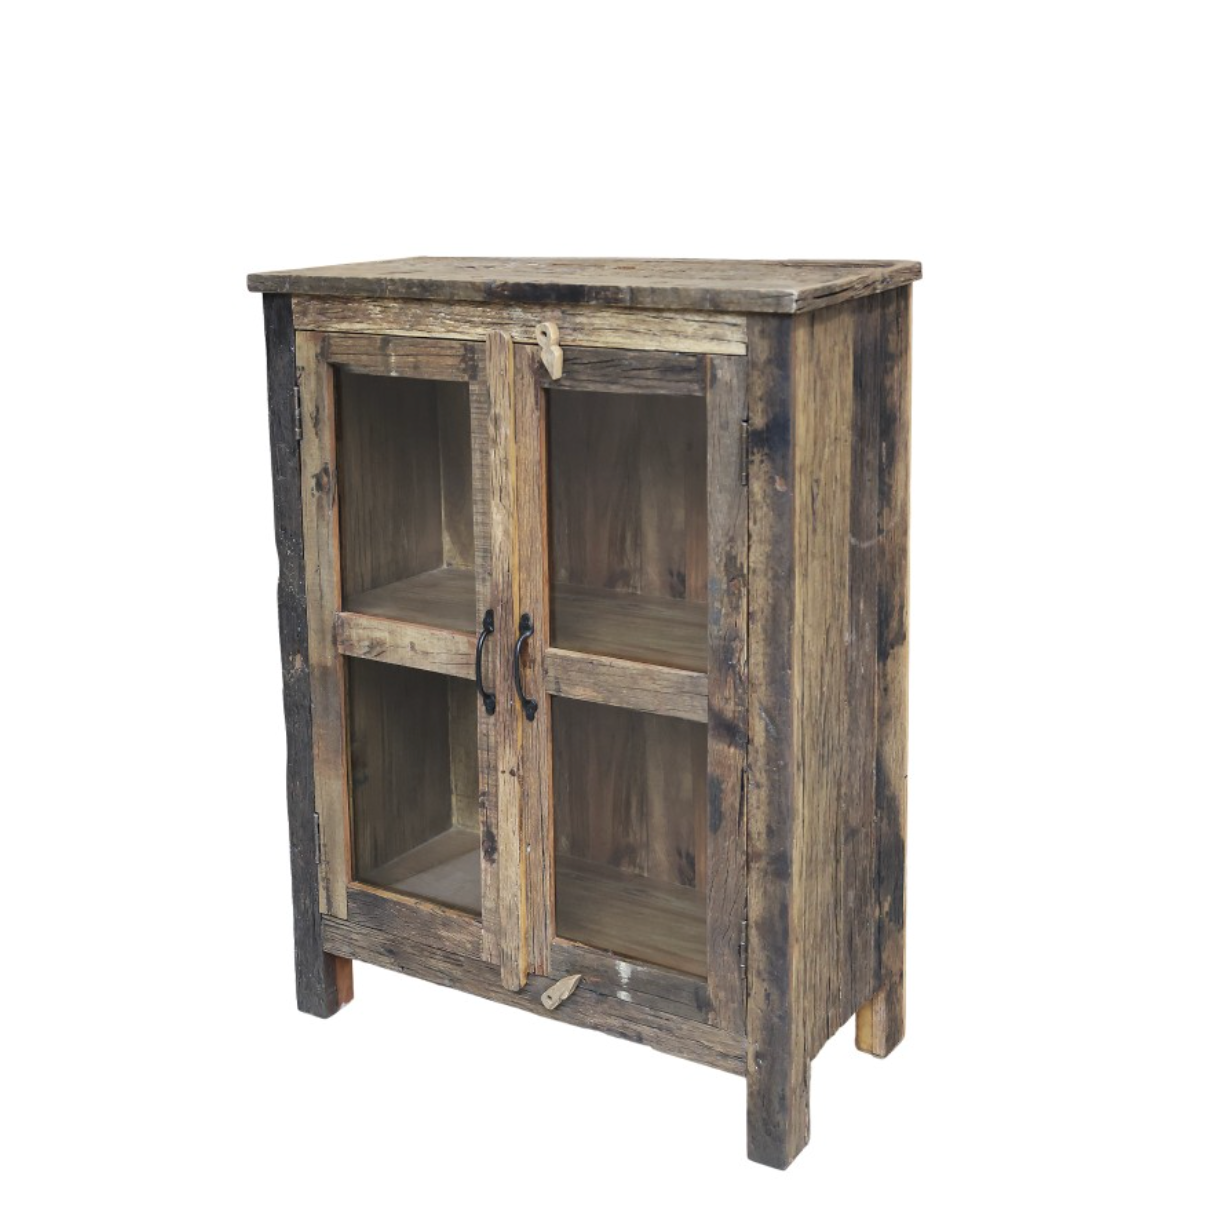 Reclaimed wooden cabinet with glass doors.